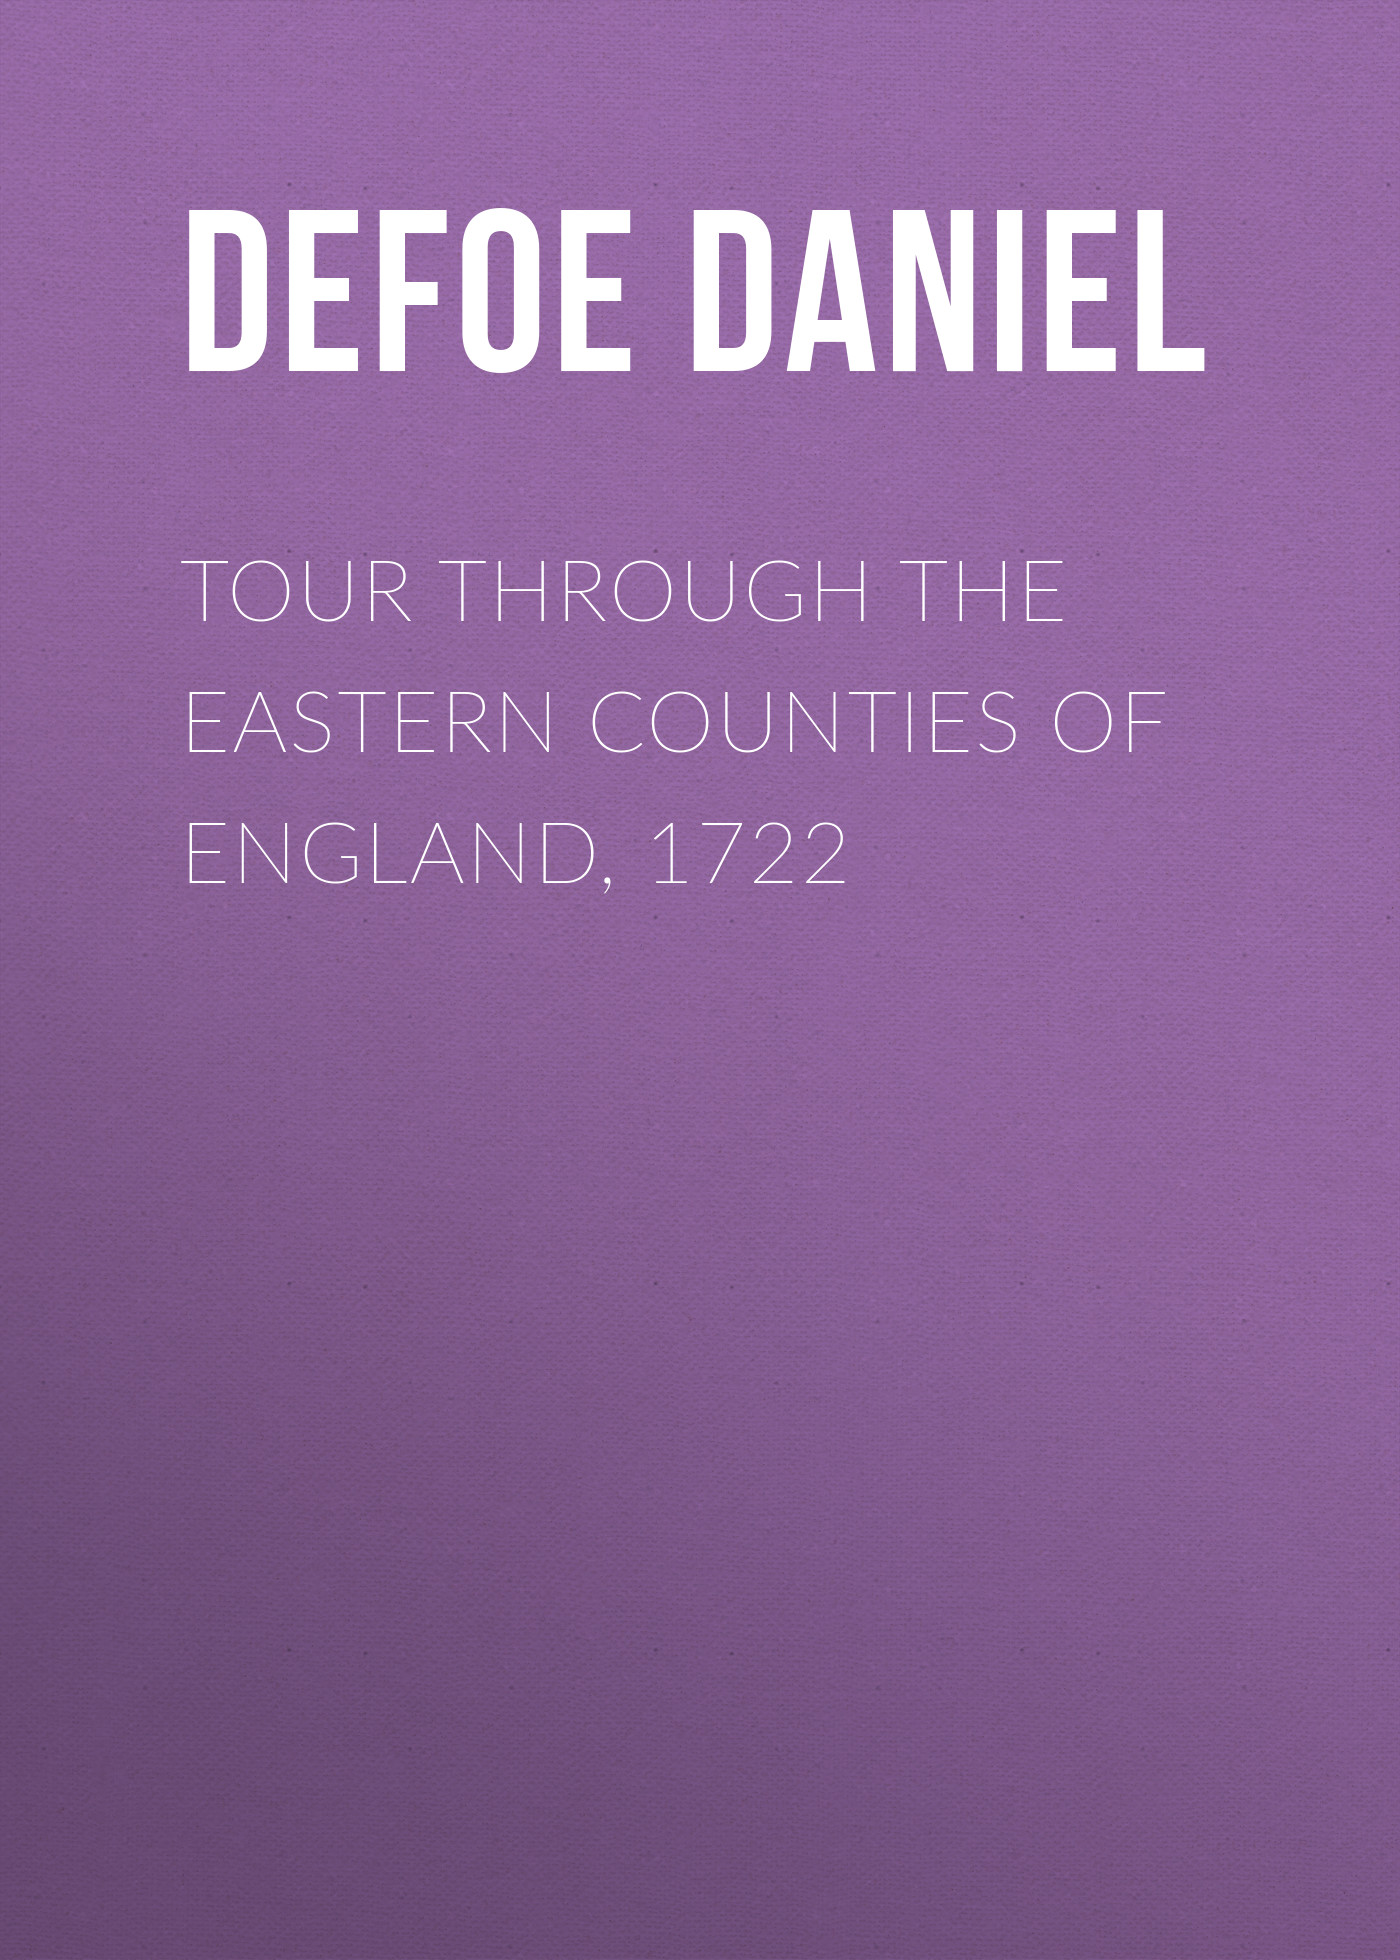 Даниэль Дефо Tour through the Eastern Counties of England, 1722